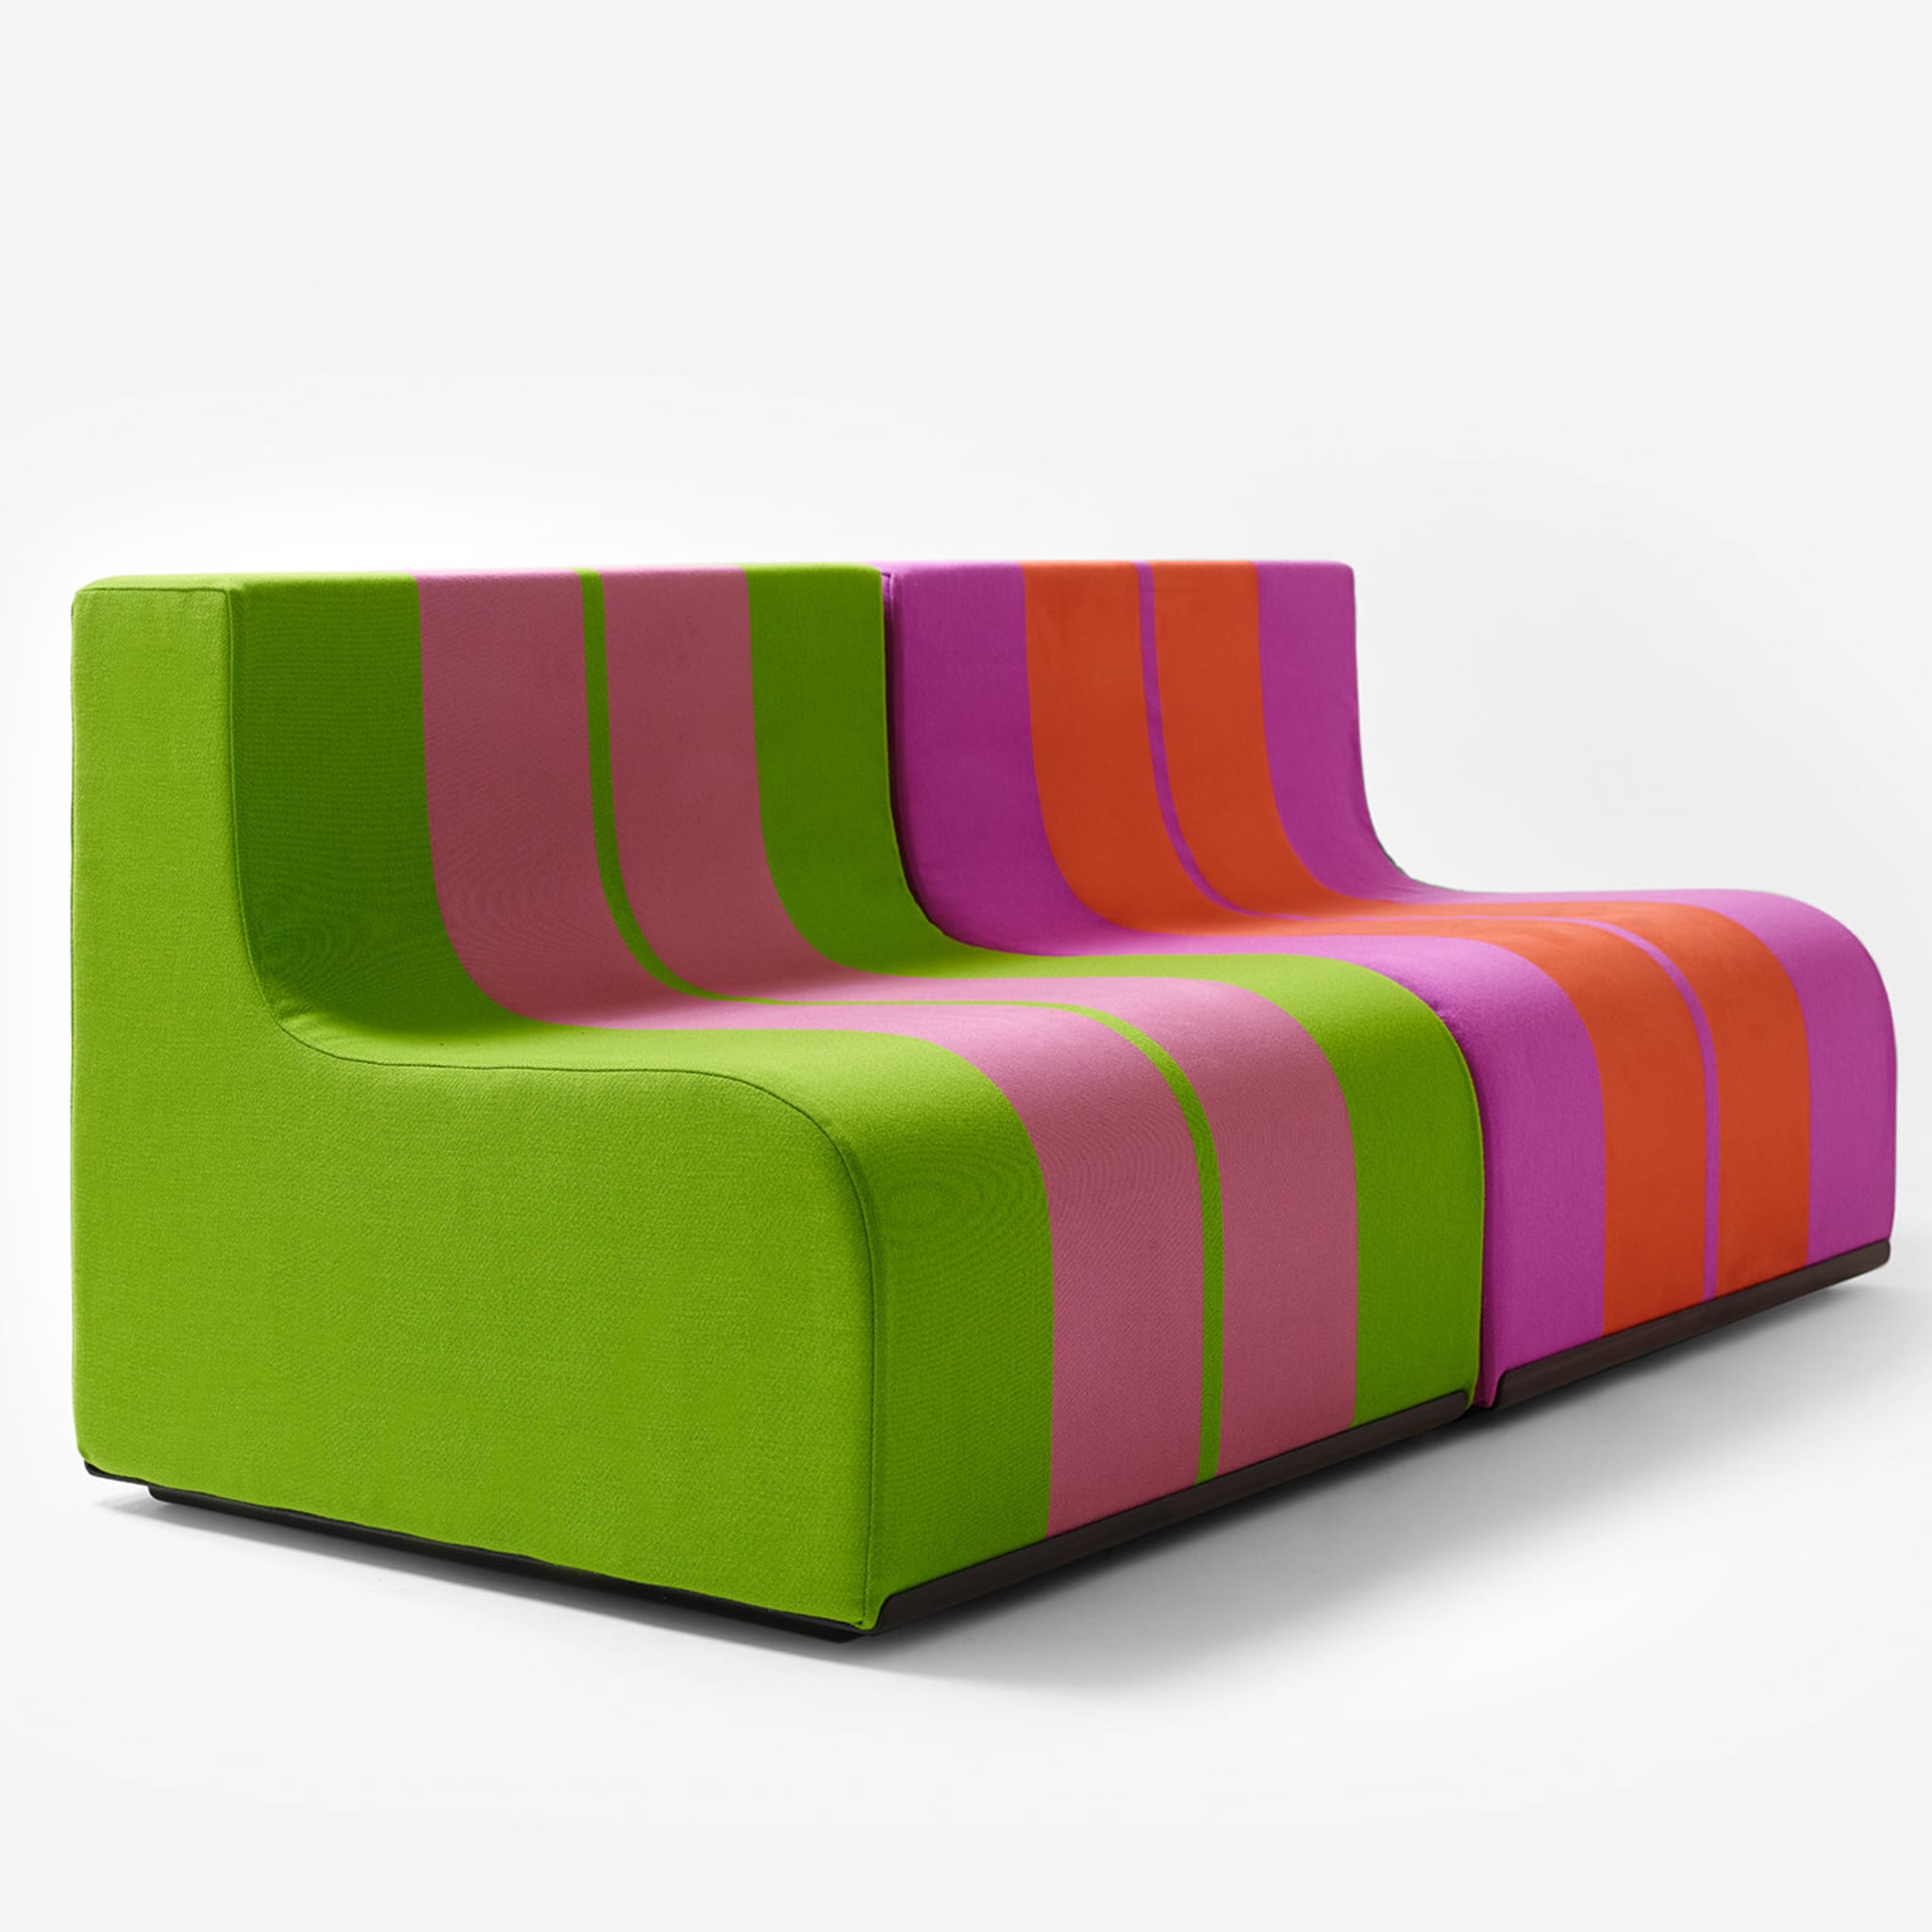 Sofo Green and Pink Armchair - Alternative view 5